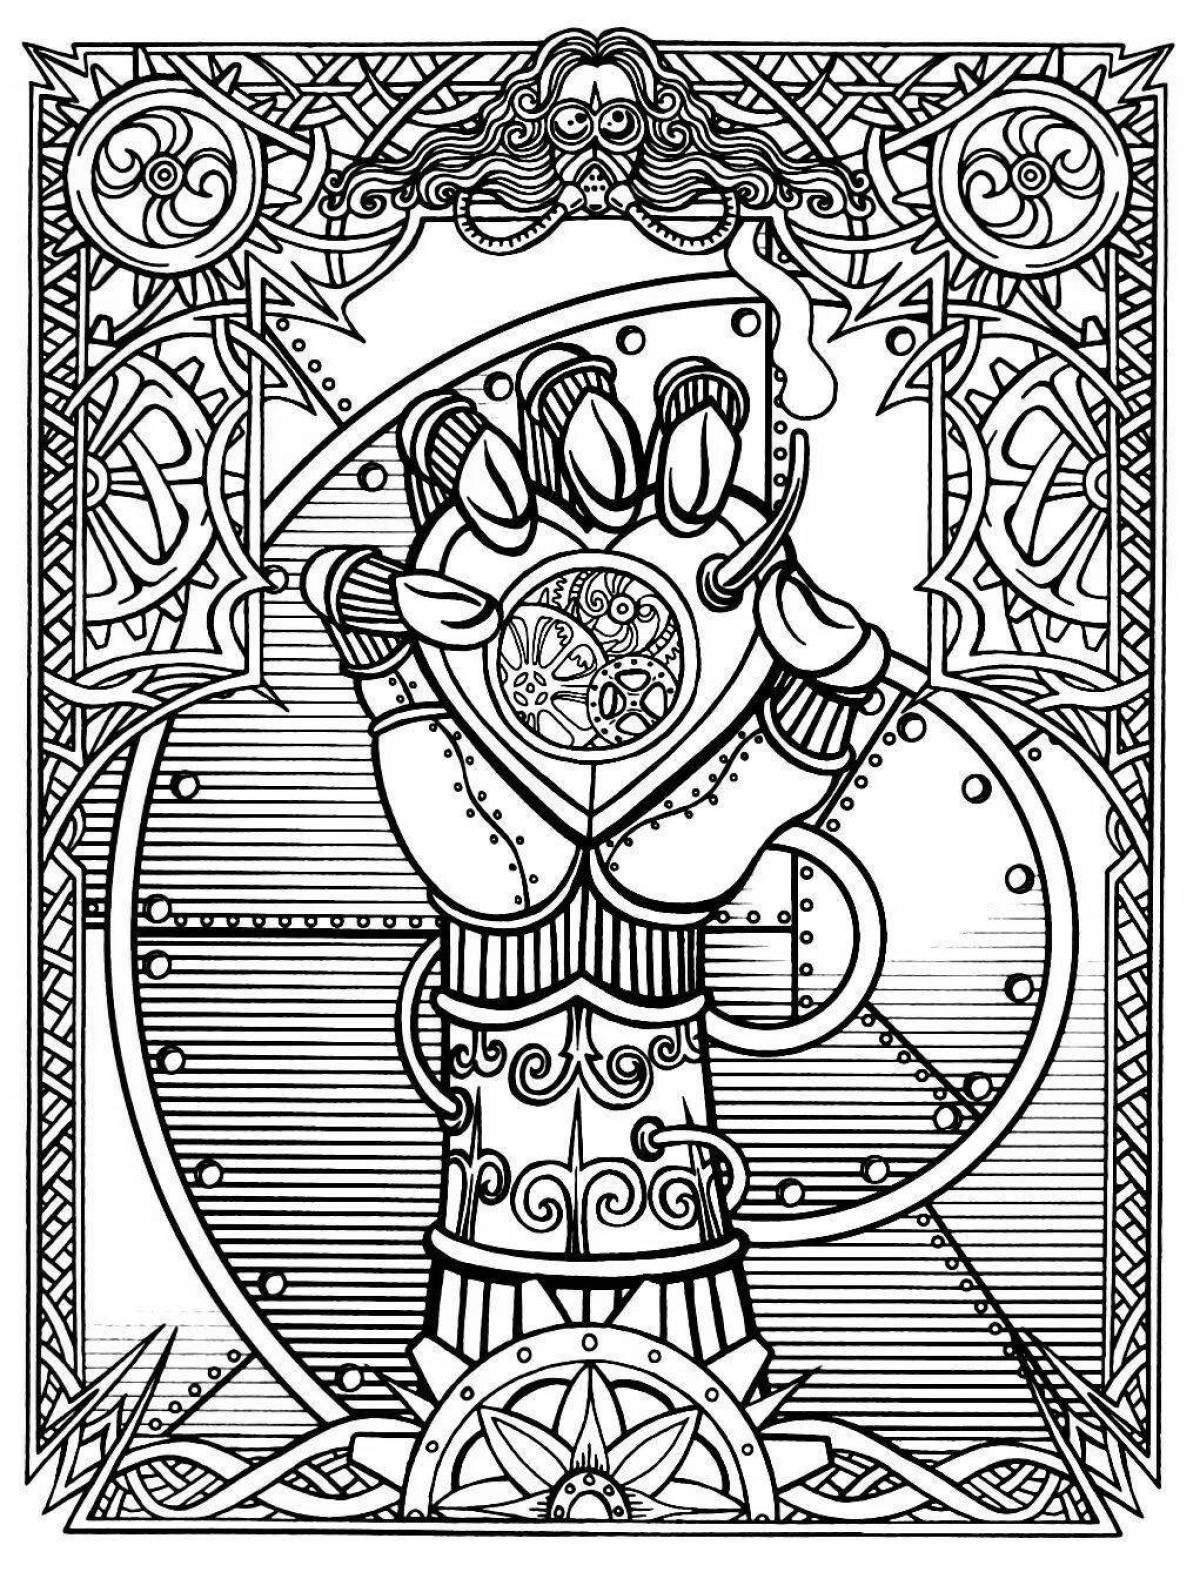 Fancy steampunk coloring book